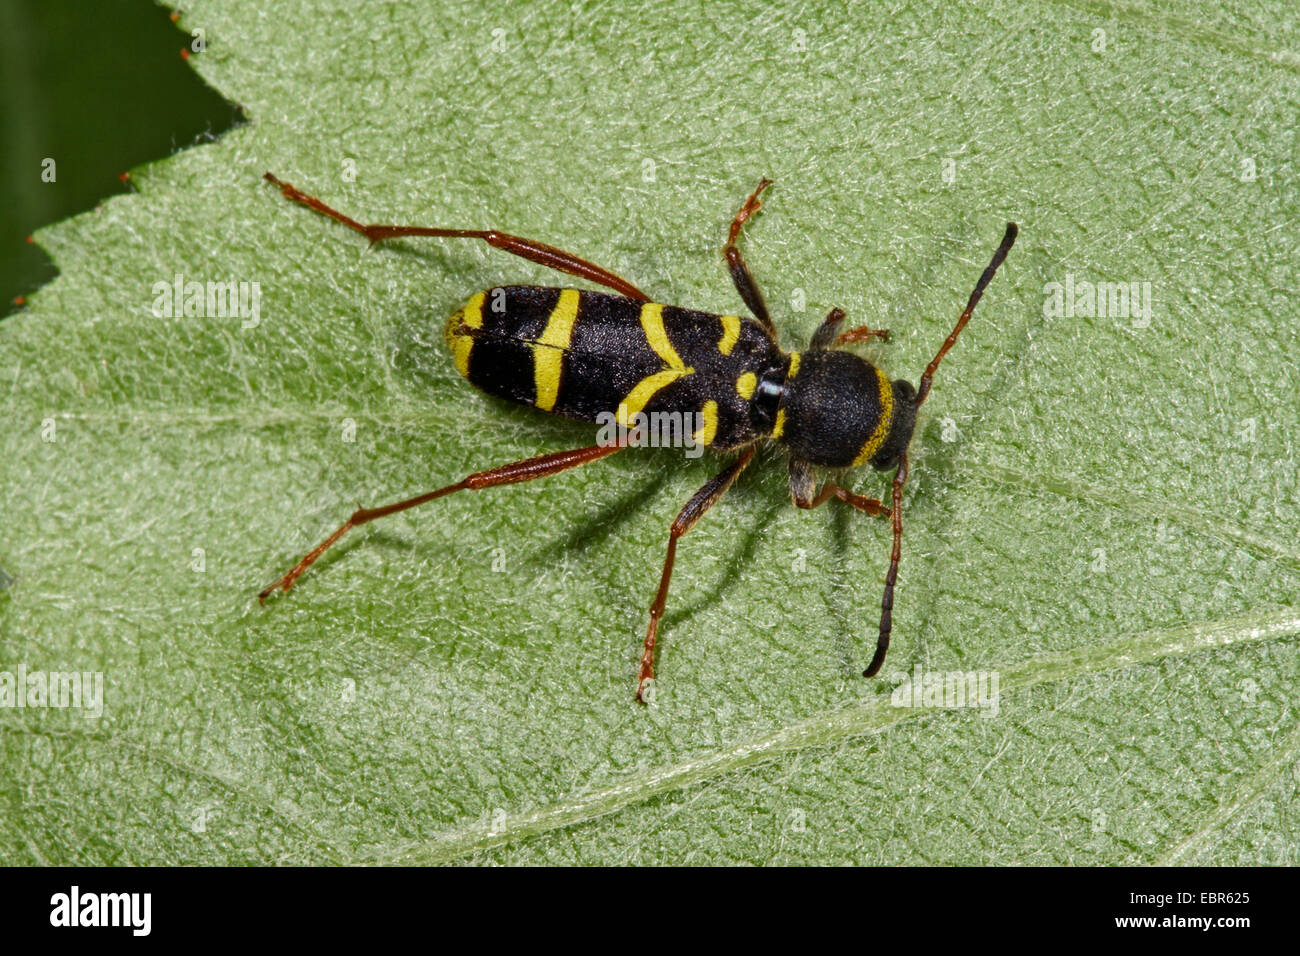 wasp beetle (Clytus arietis), on a leaf, Germany Stock Photo